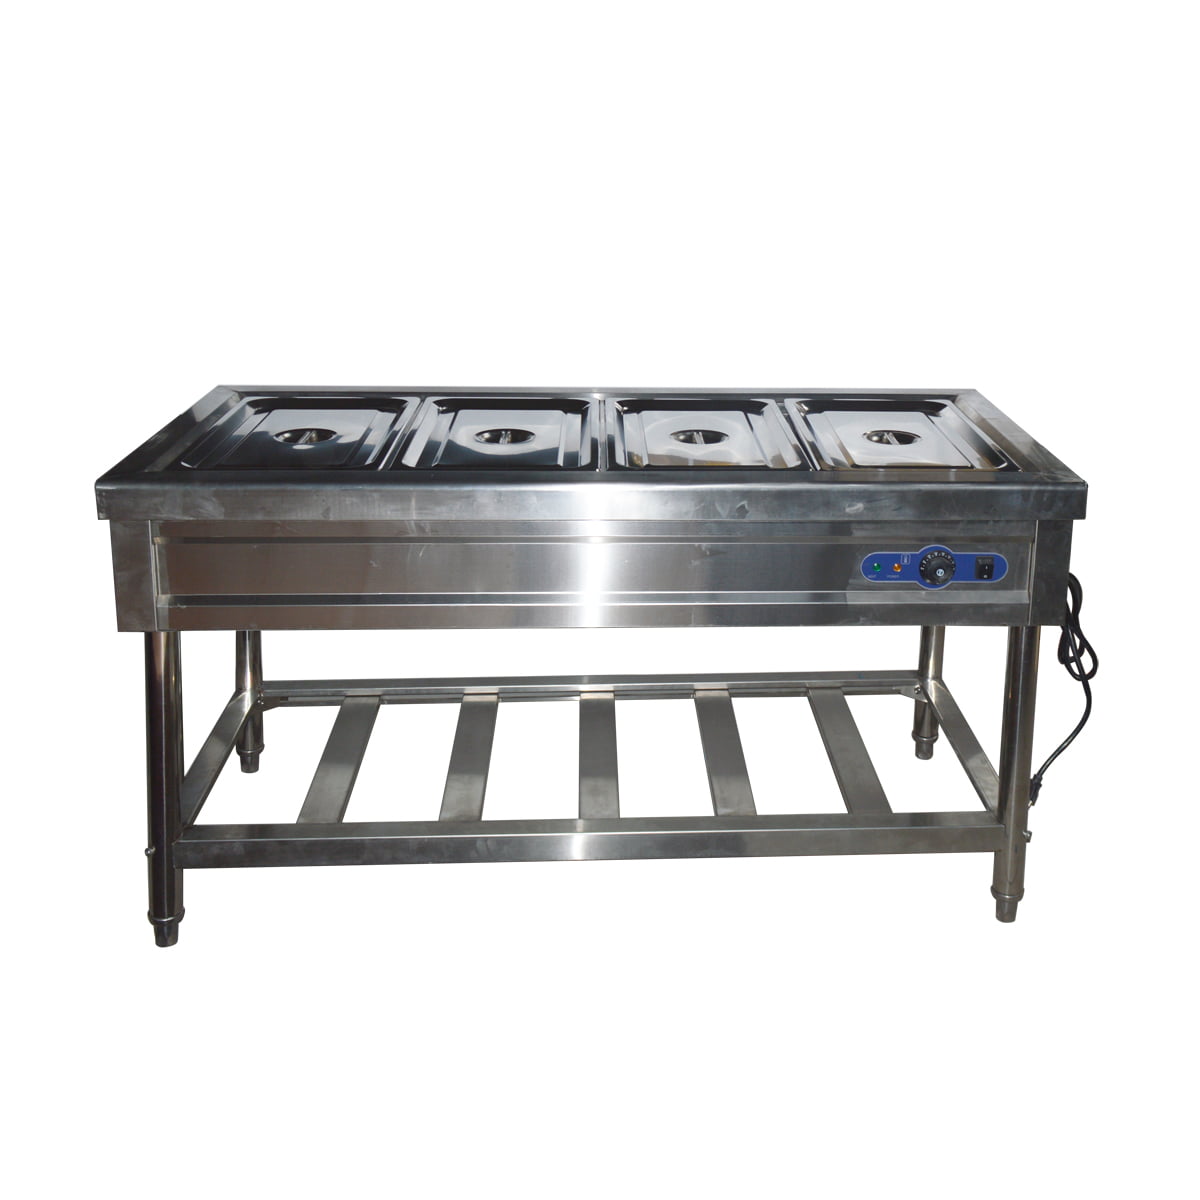 Temperature of steam table фото 98